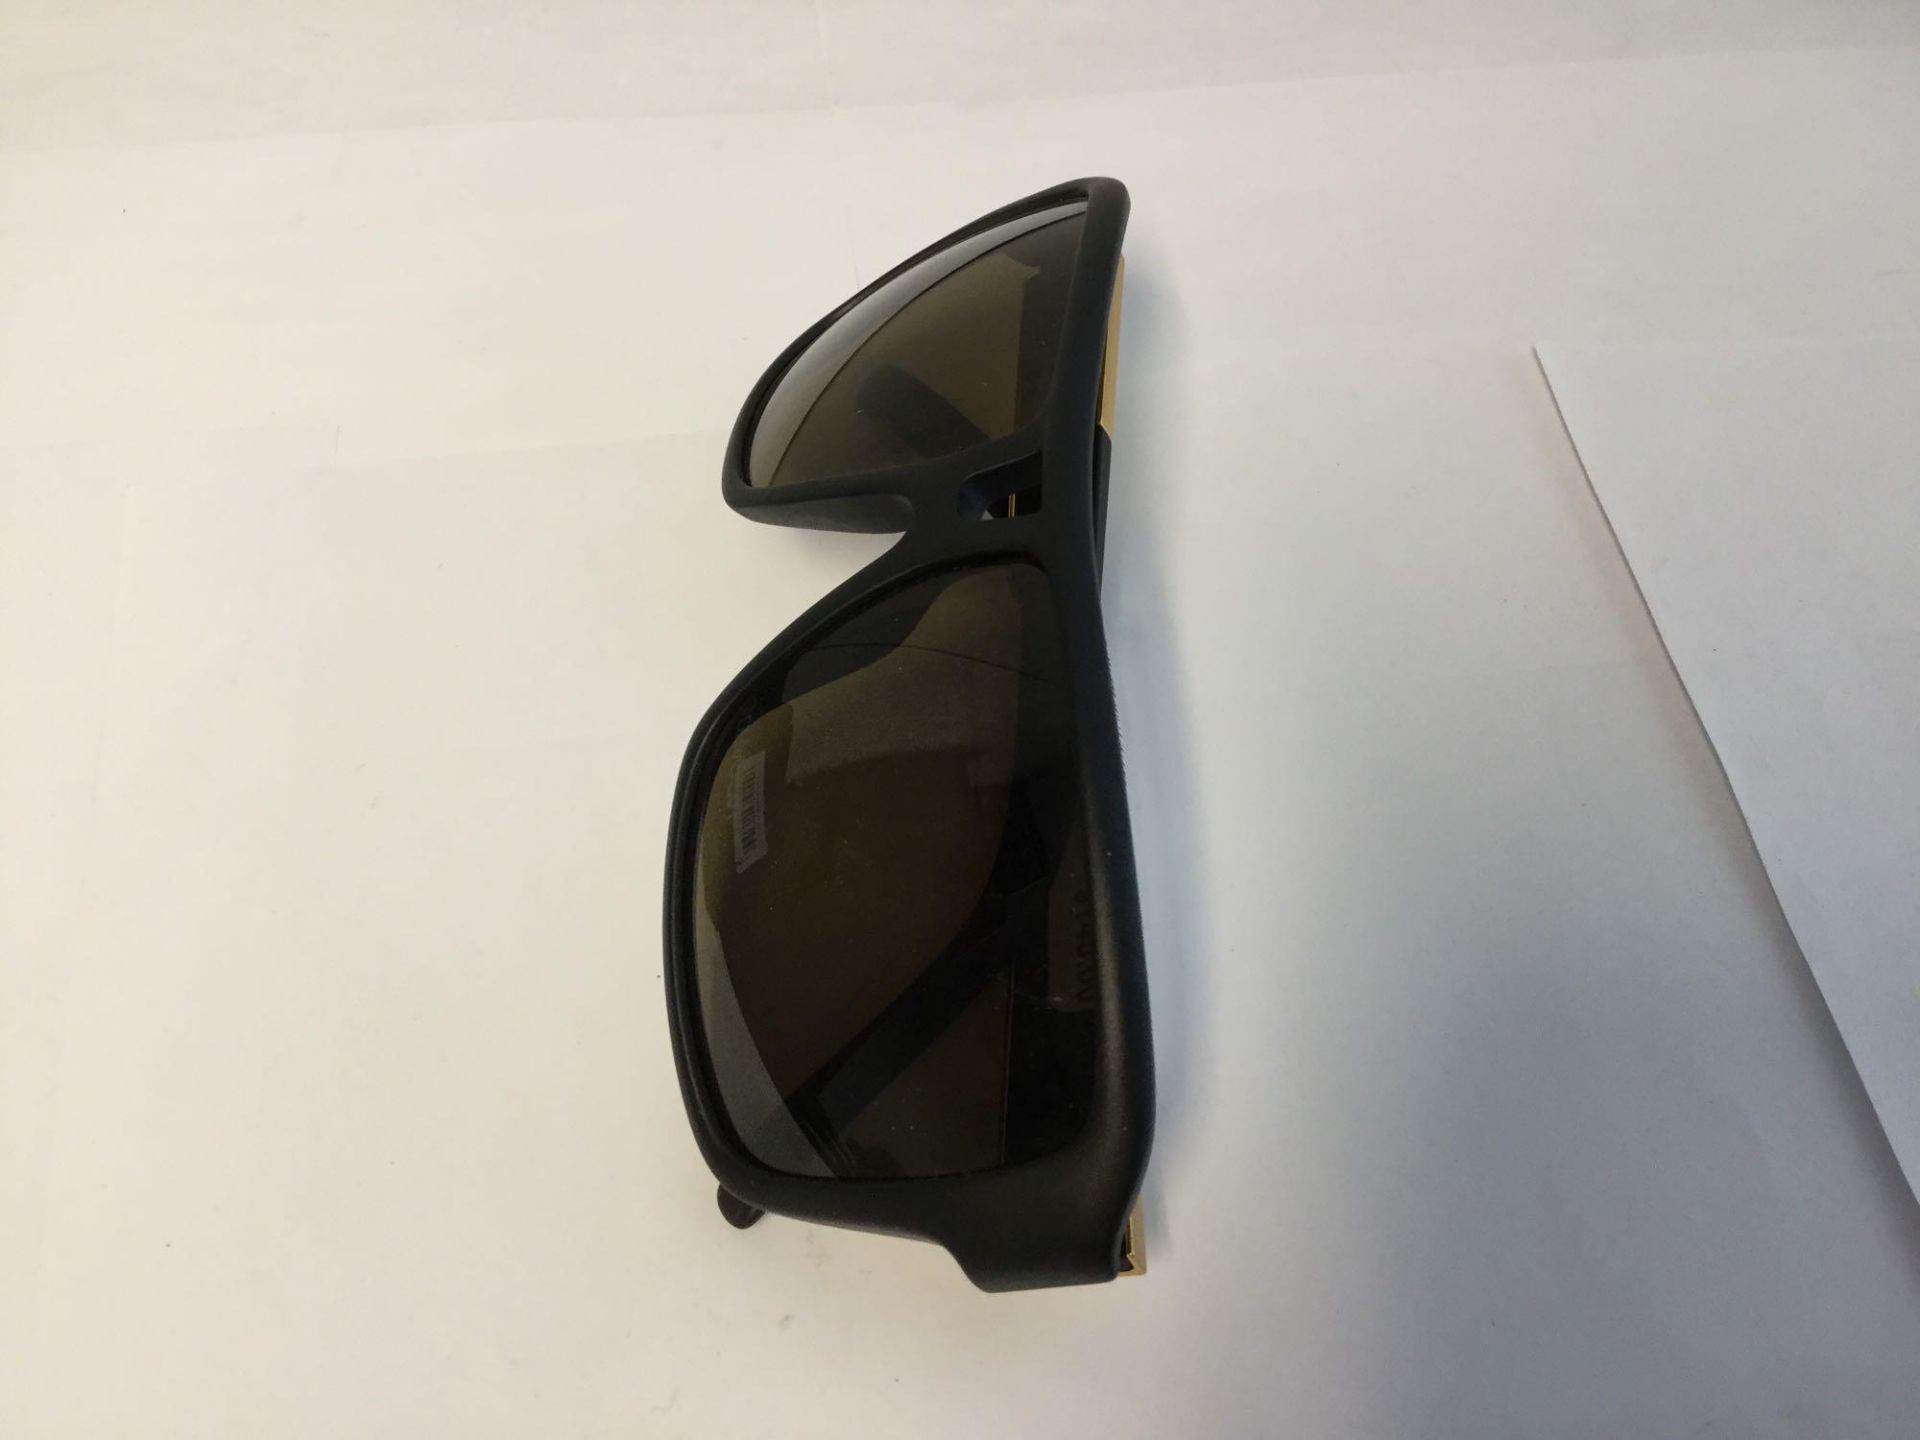 Dragon Alliance Sunglasses with Box and Bag value $ 145 - Image 3 of 4